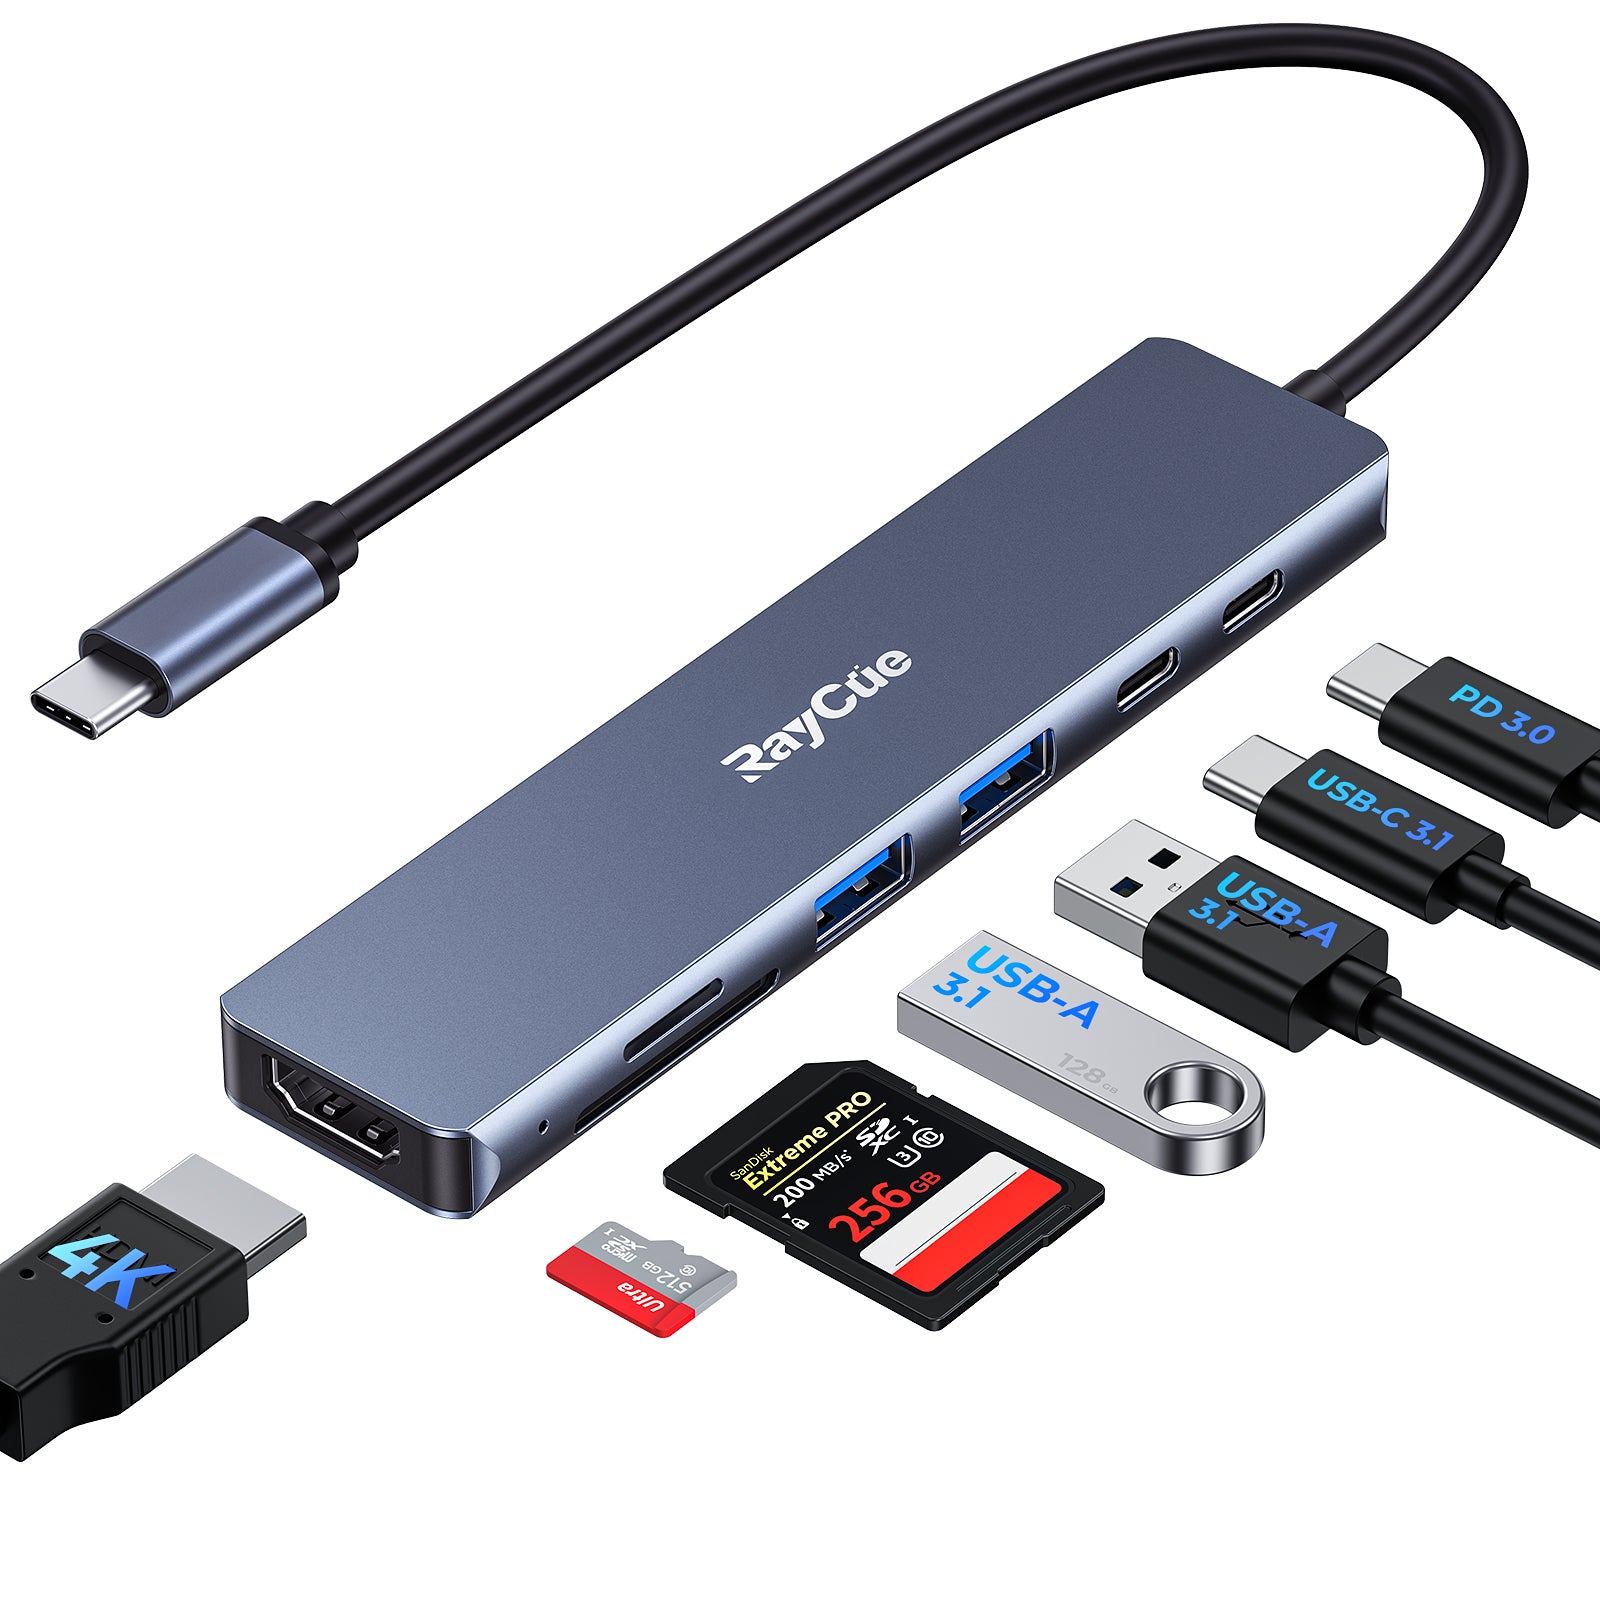 7IN1 USB C to HDMI Hub